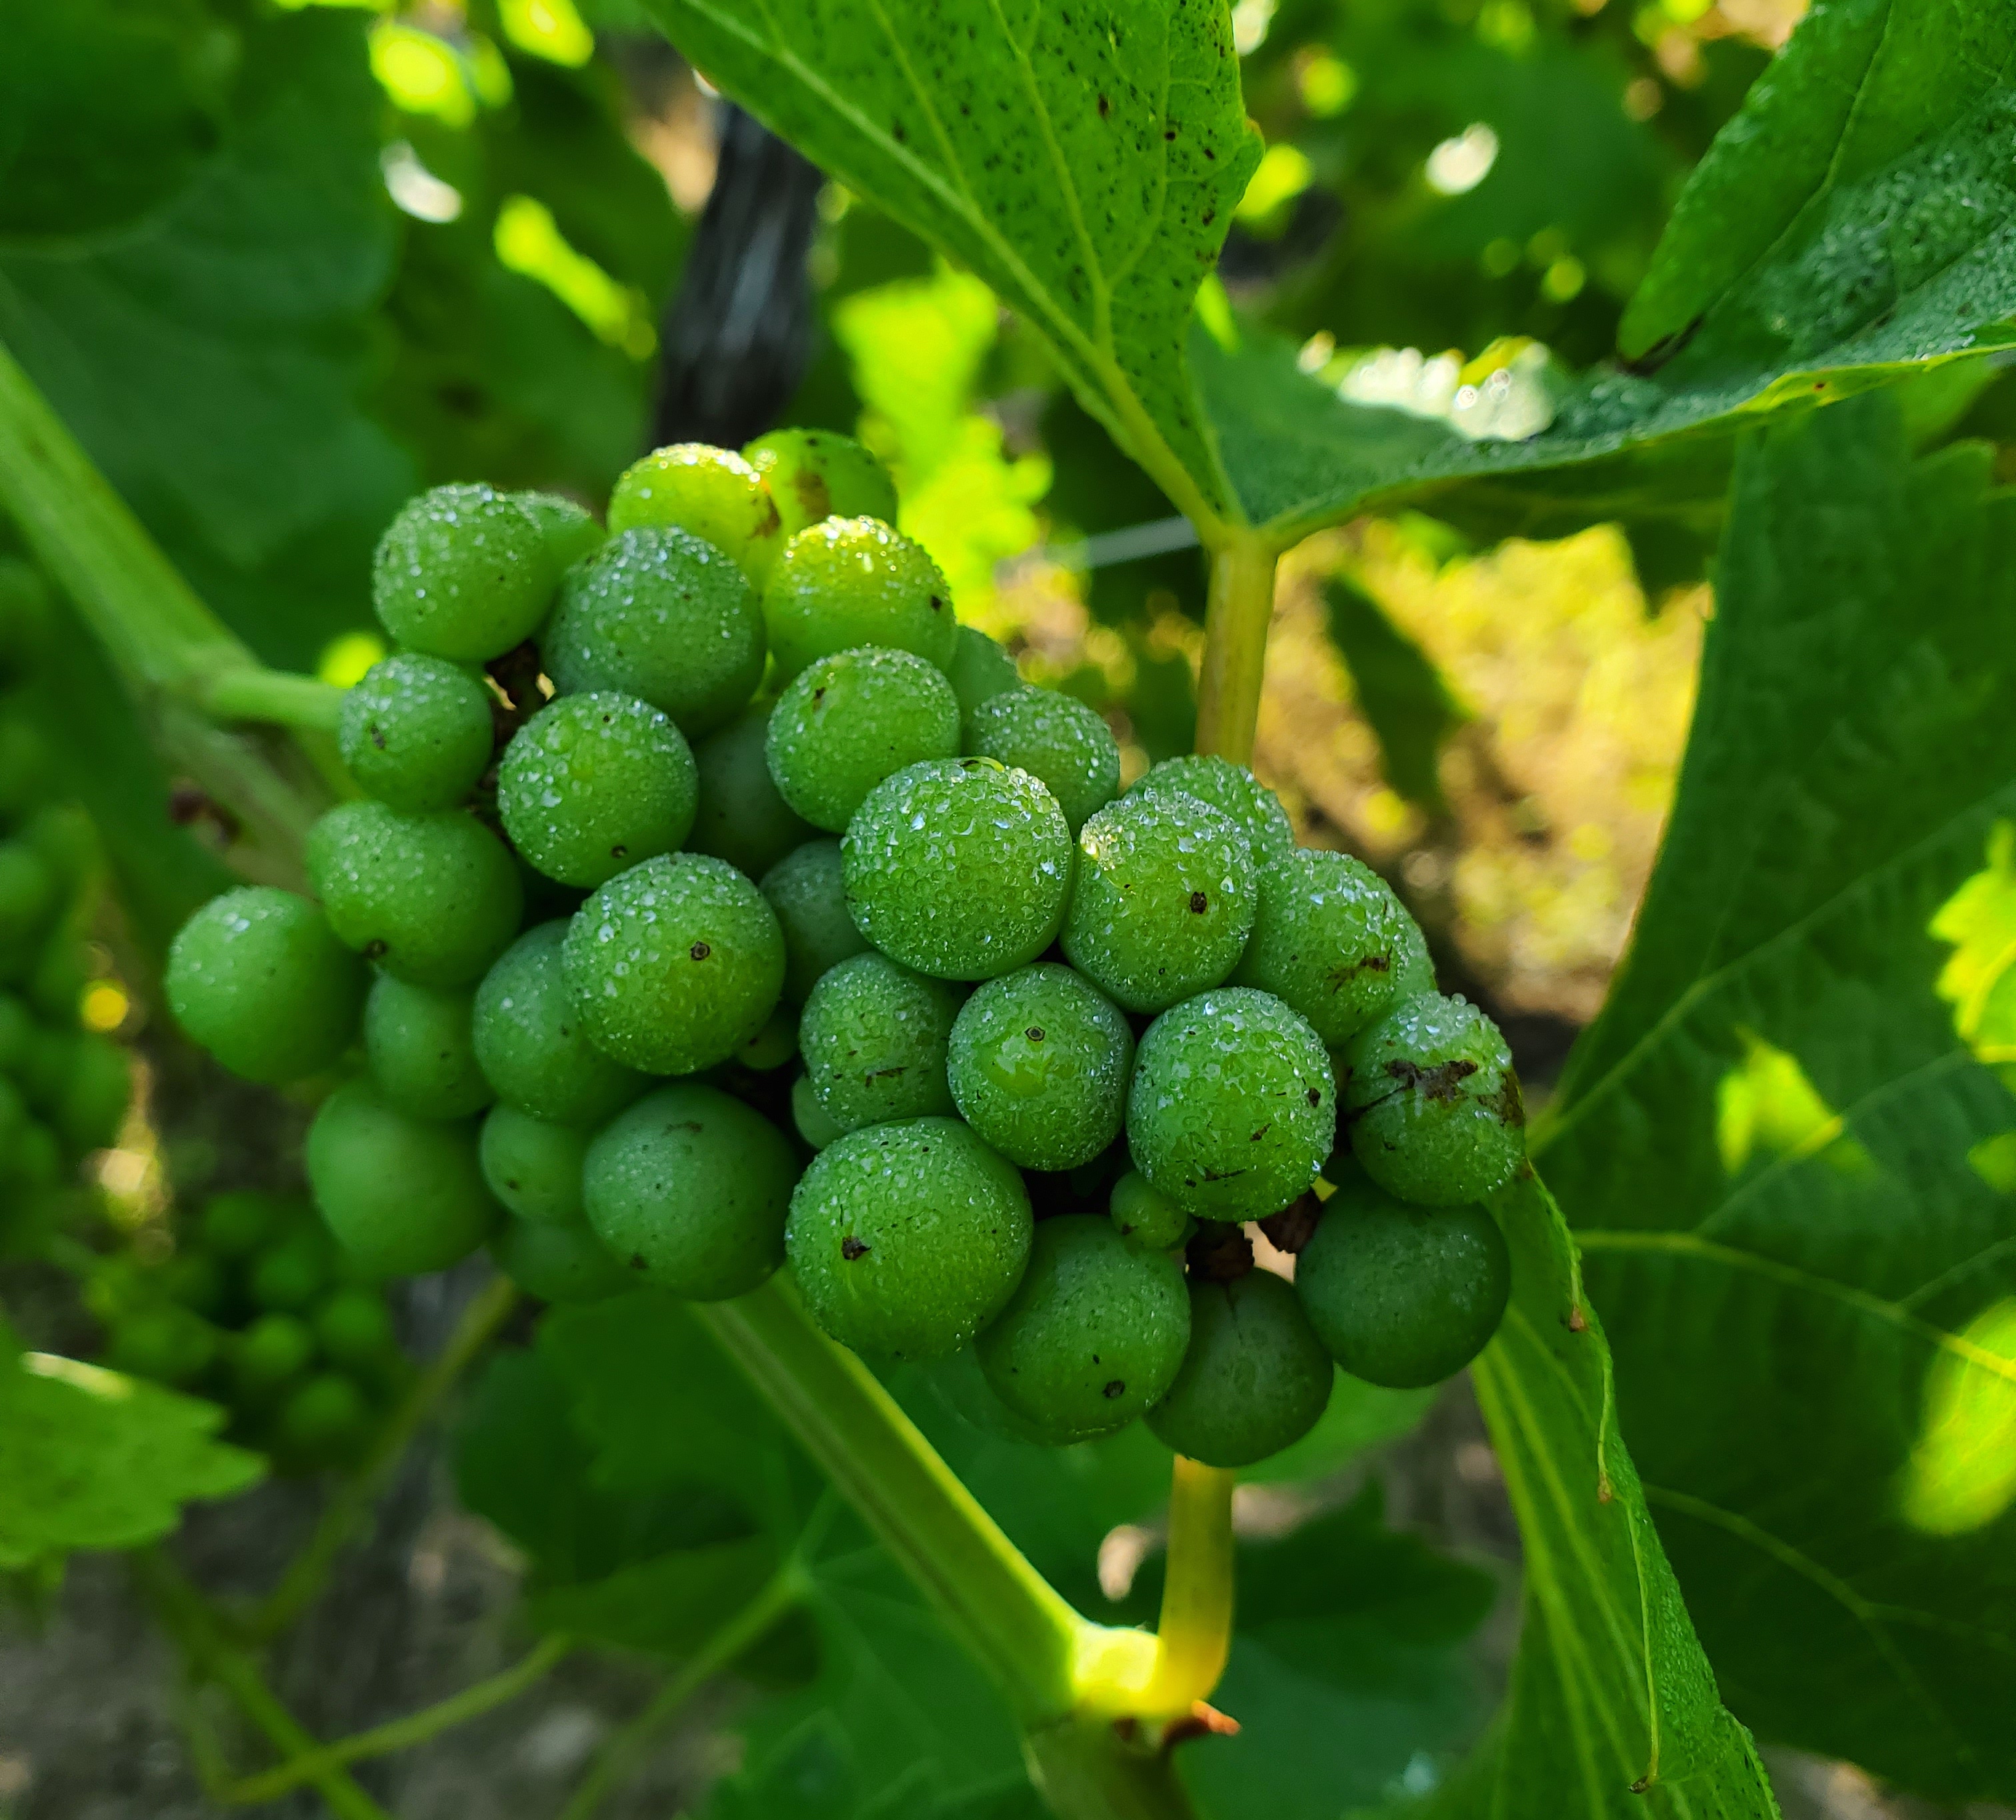 Dew on grapes